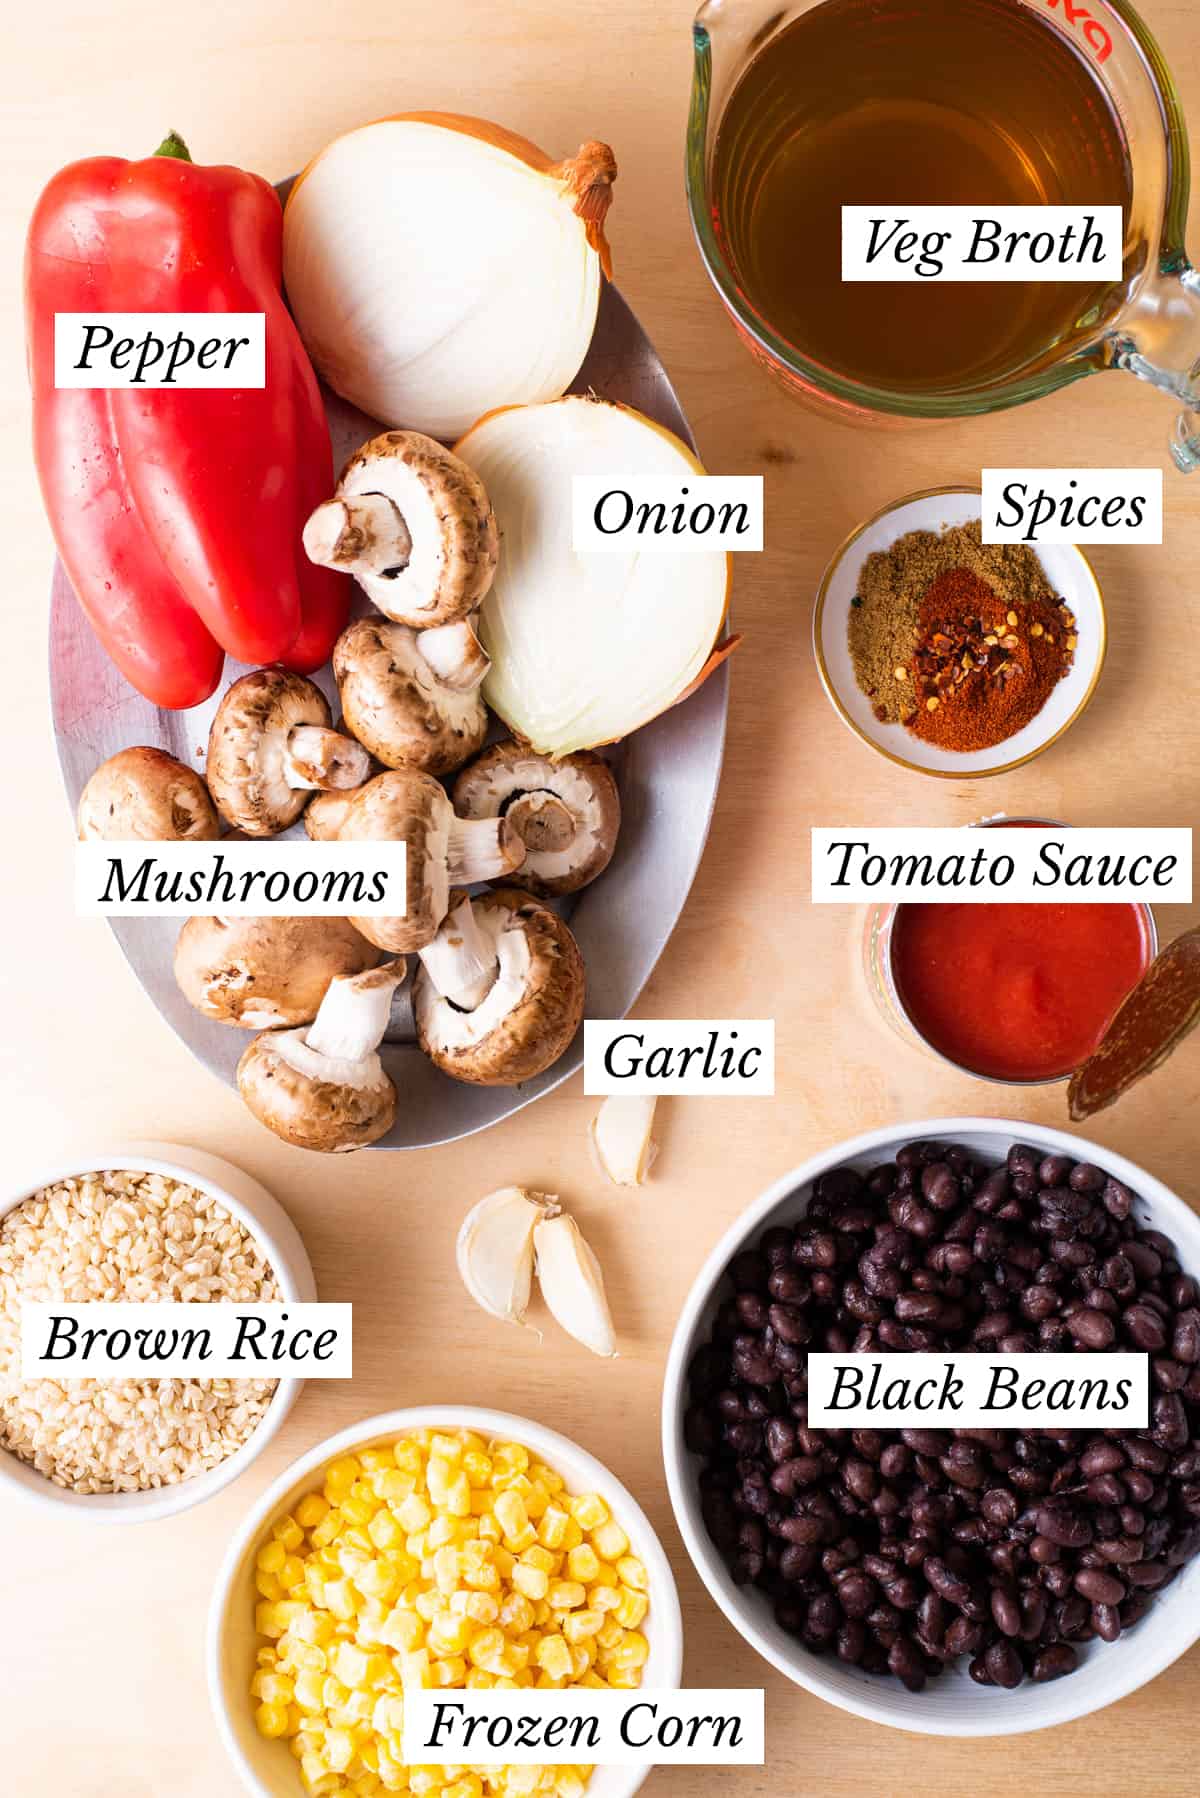 Ingredients gathered to make a baked Mexican rice.